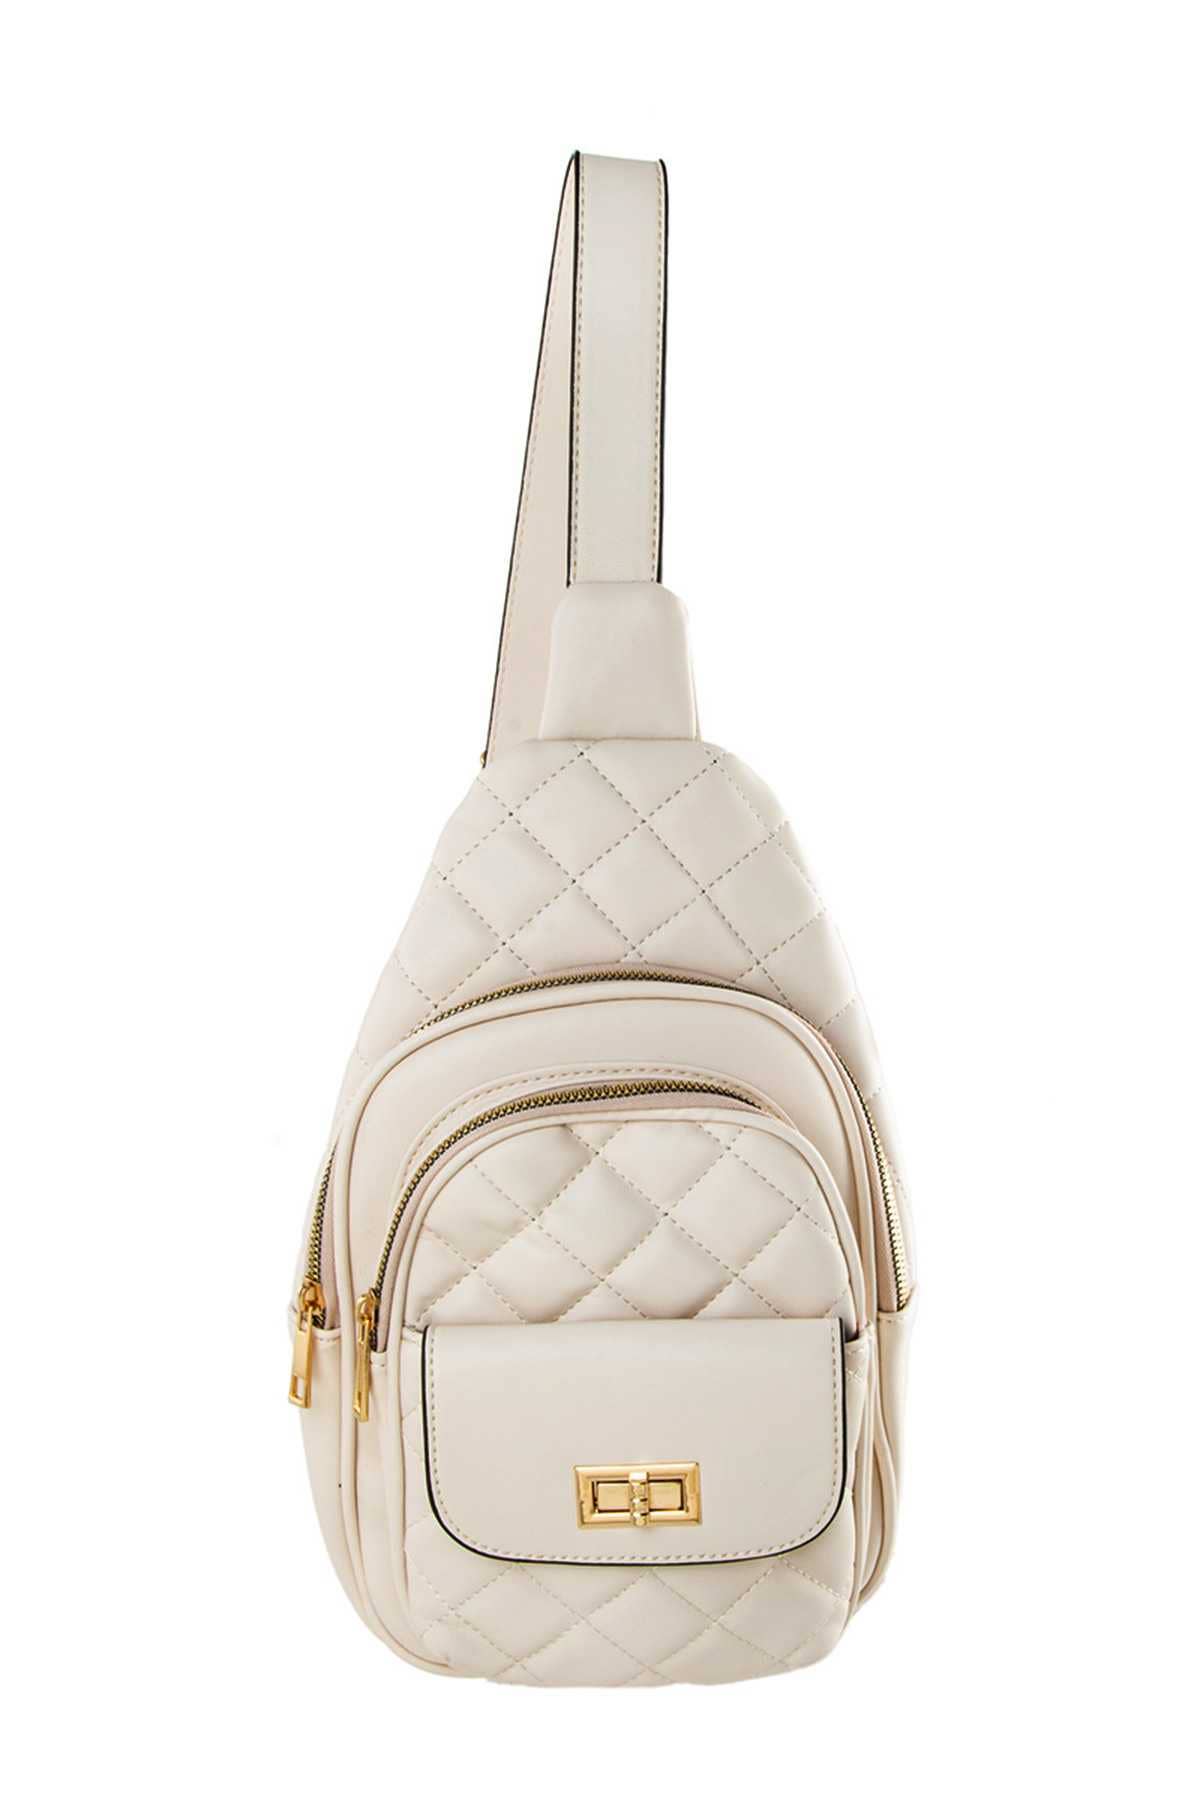 Diamond Quilted Sling Bag - Beige